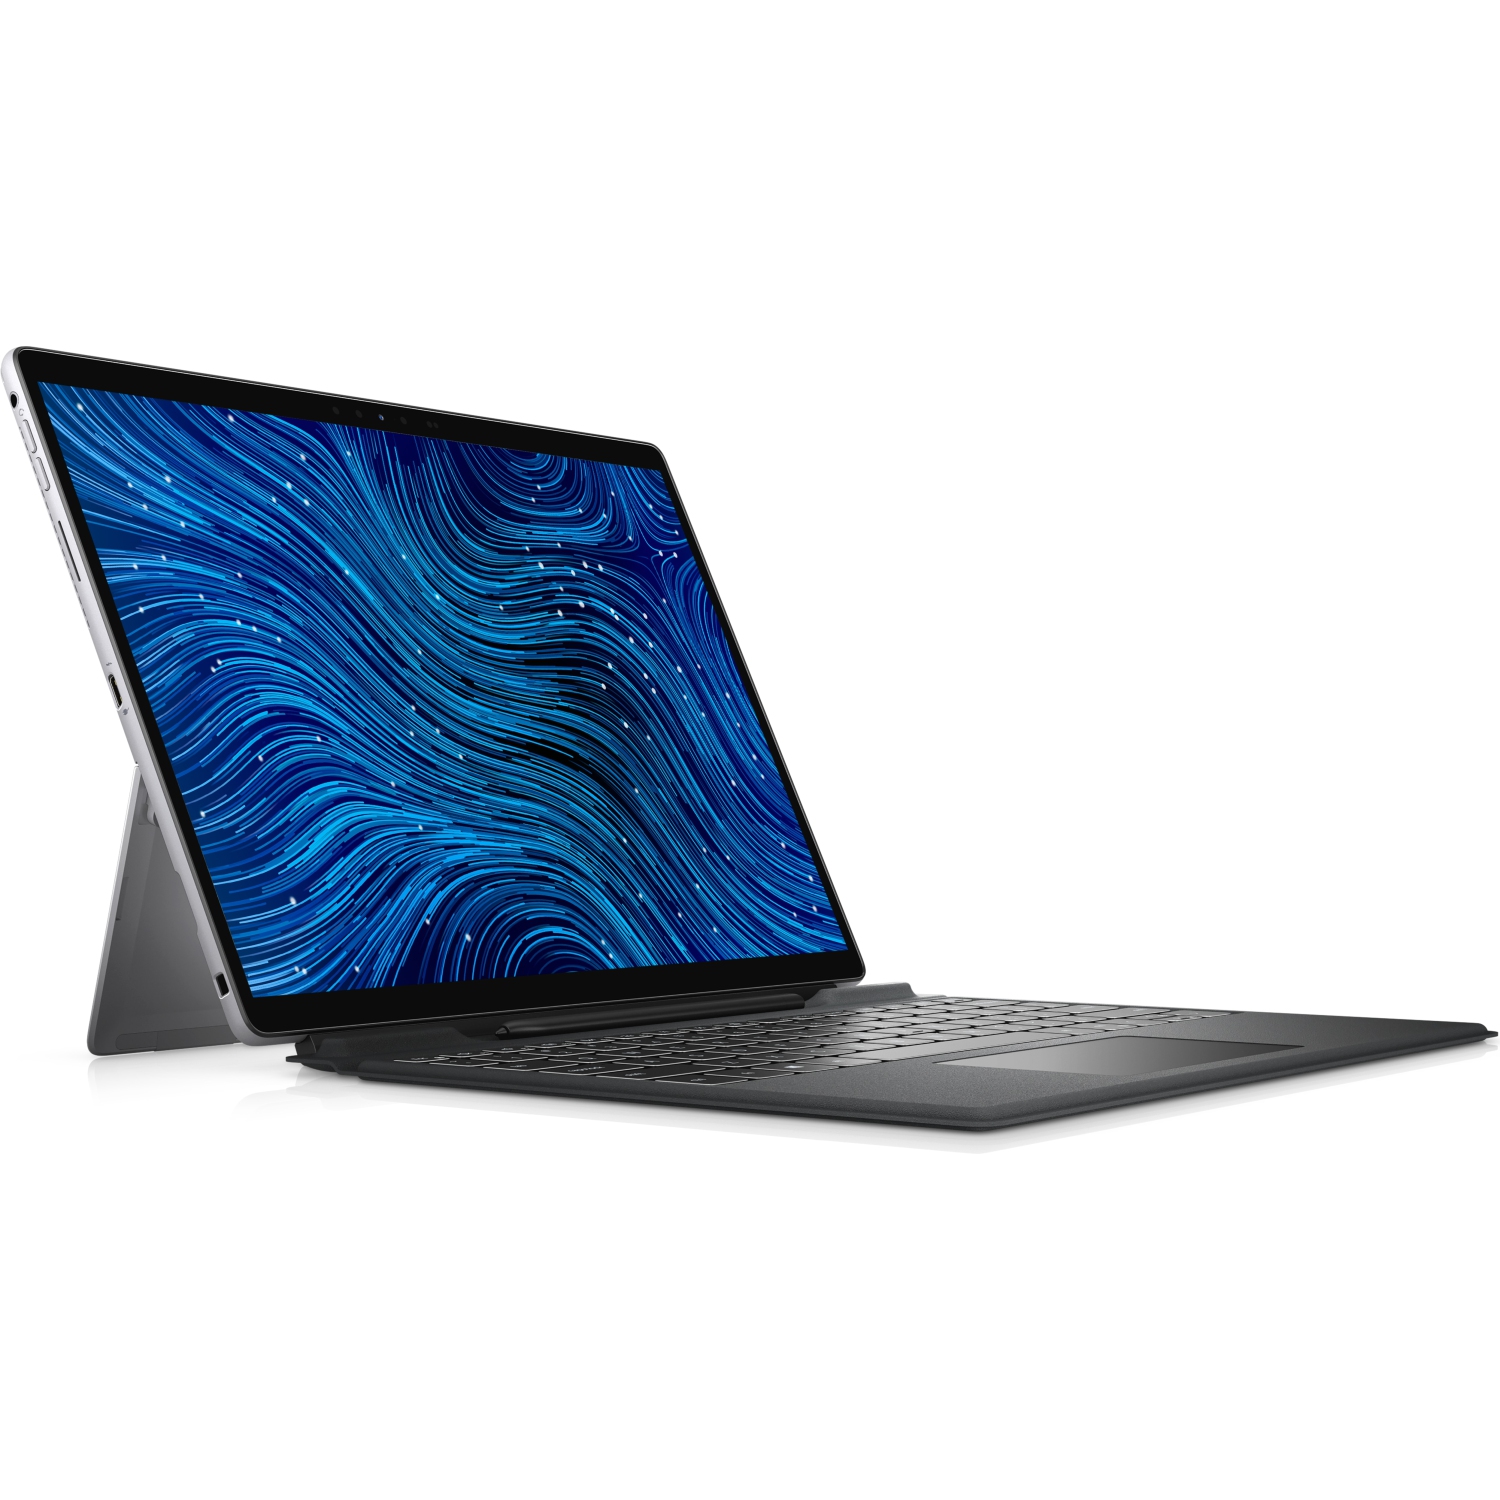 Refurbished (Excellent) – Dell Latitude 7000 7320 Detachable 2-in-1 (2021) | 13" FHD+ Touch | Core i7 - 512GB SSD - 16GB RAM | 4 Cores @ 4.6 GHz - 11th Gen CPU